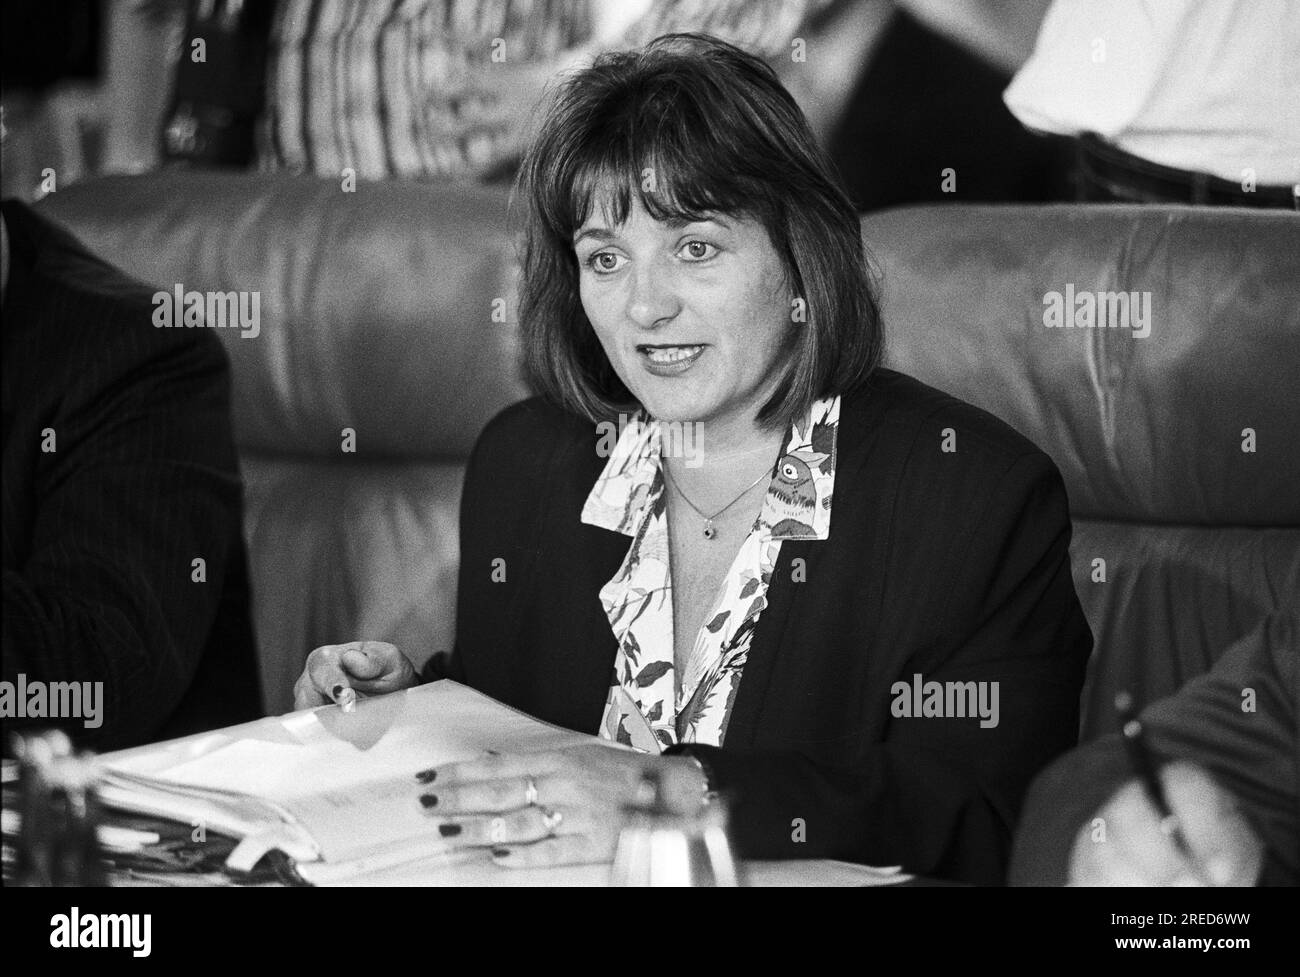 Germany, Bonn, 27/08/1992 Archive: 36-09-10 Meeting of the Federal Cabinet Photo: Sabine Leutheusser-Schnarrenberger, Federal Minister of Justice [automated translation] Stock Photo